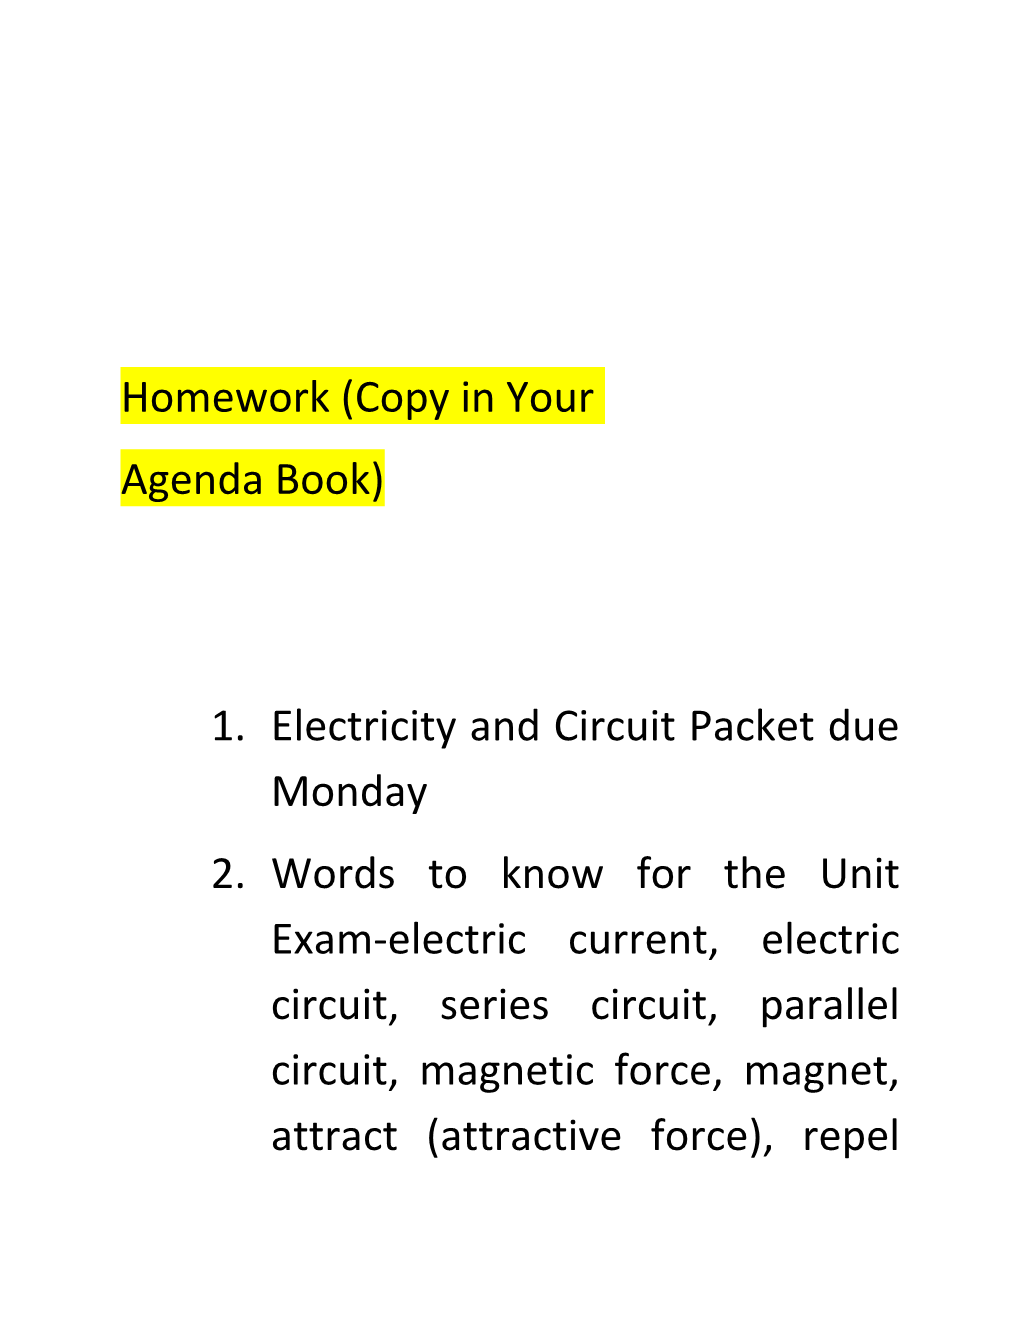 Complete Electromagnetism and Magnet Reading and Questions